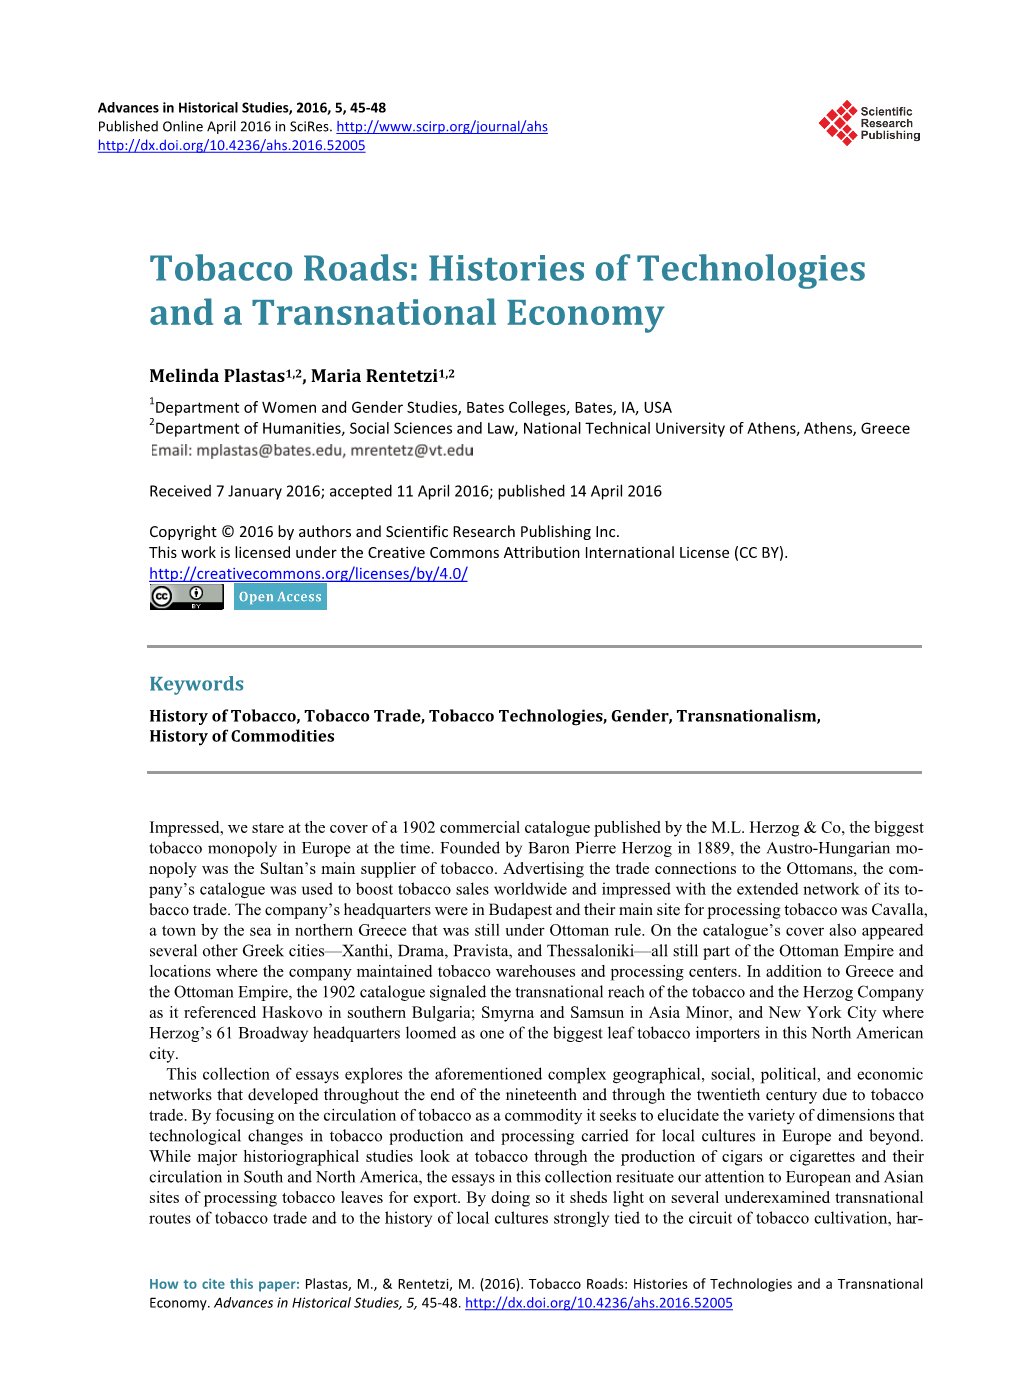 Tobacco Roads: Histories of Technologies and a Transnational Economy